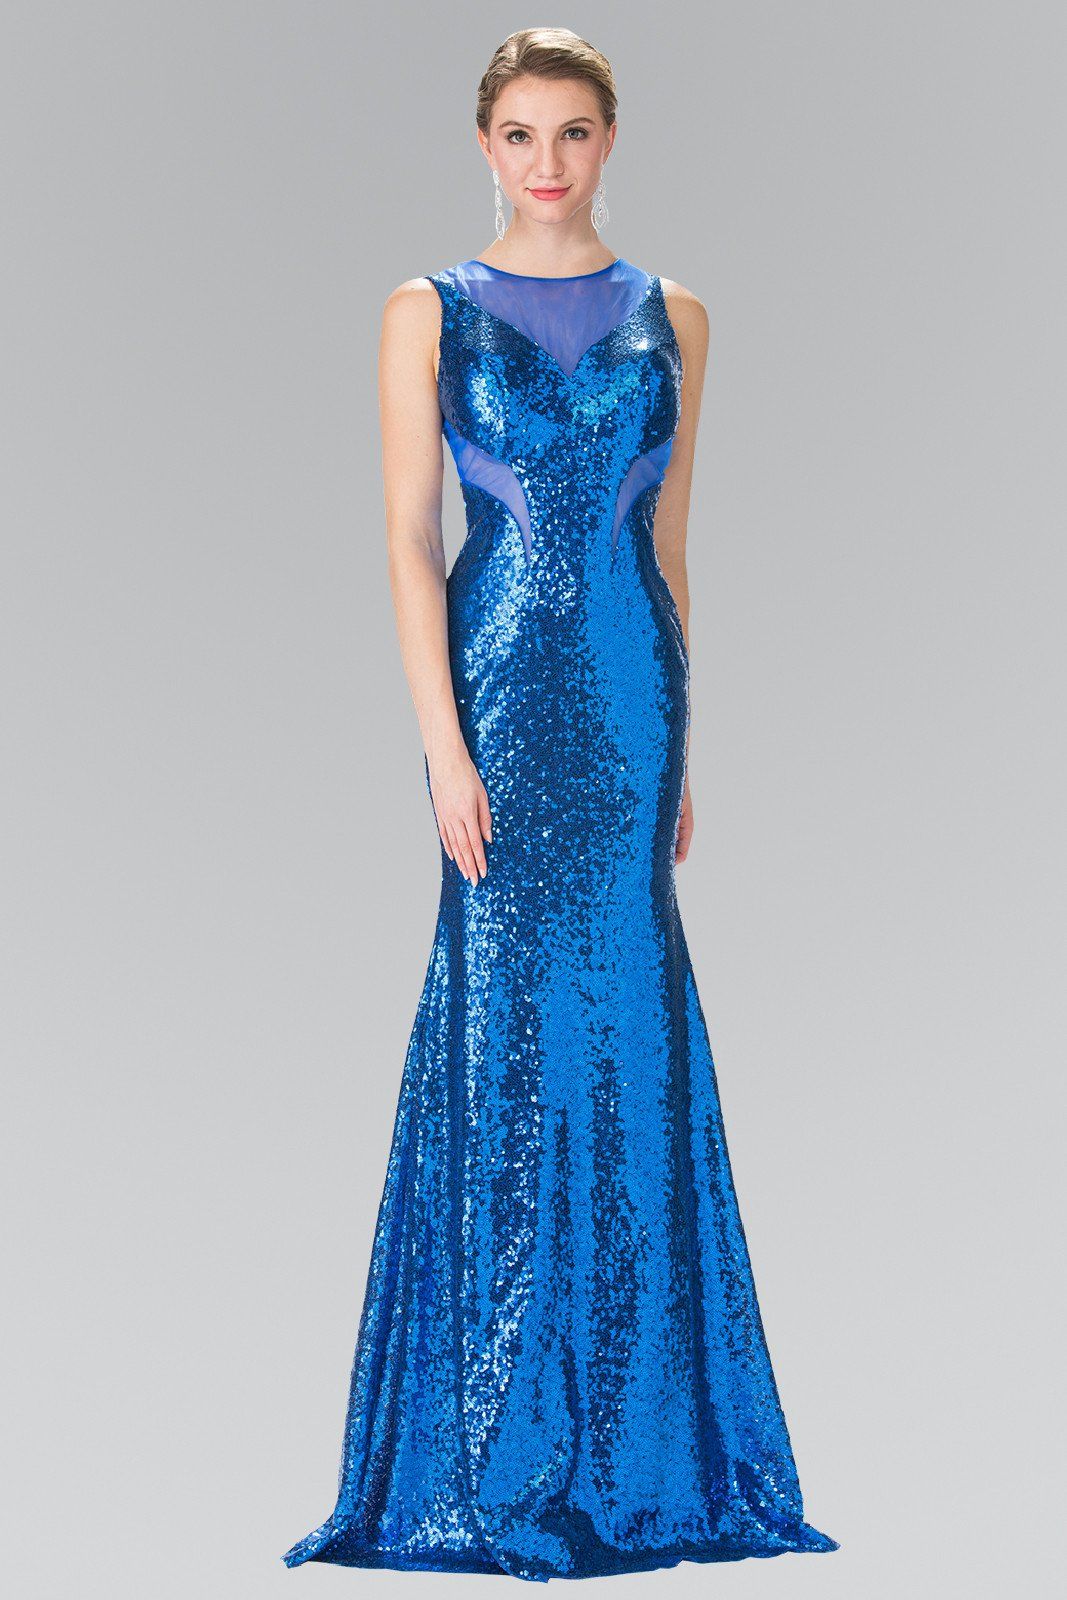 Sleeveless Sequined Dress with Sheer Cutouts by Elizabeth K GL2292-Long Formal Dresses-ABC Fashion